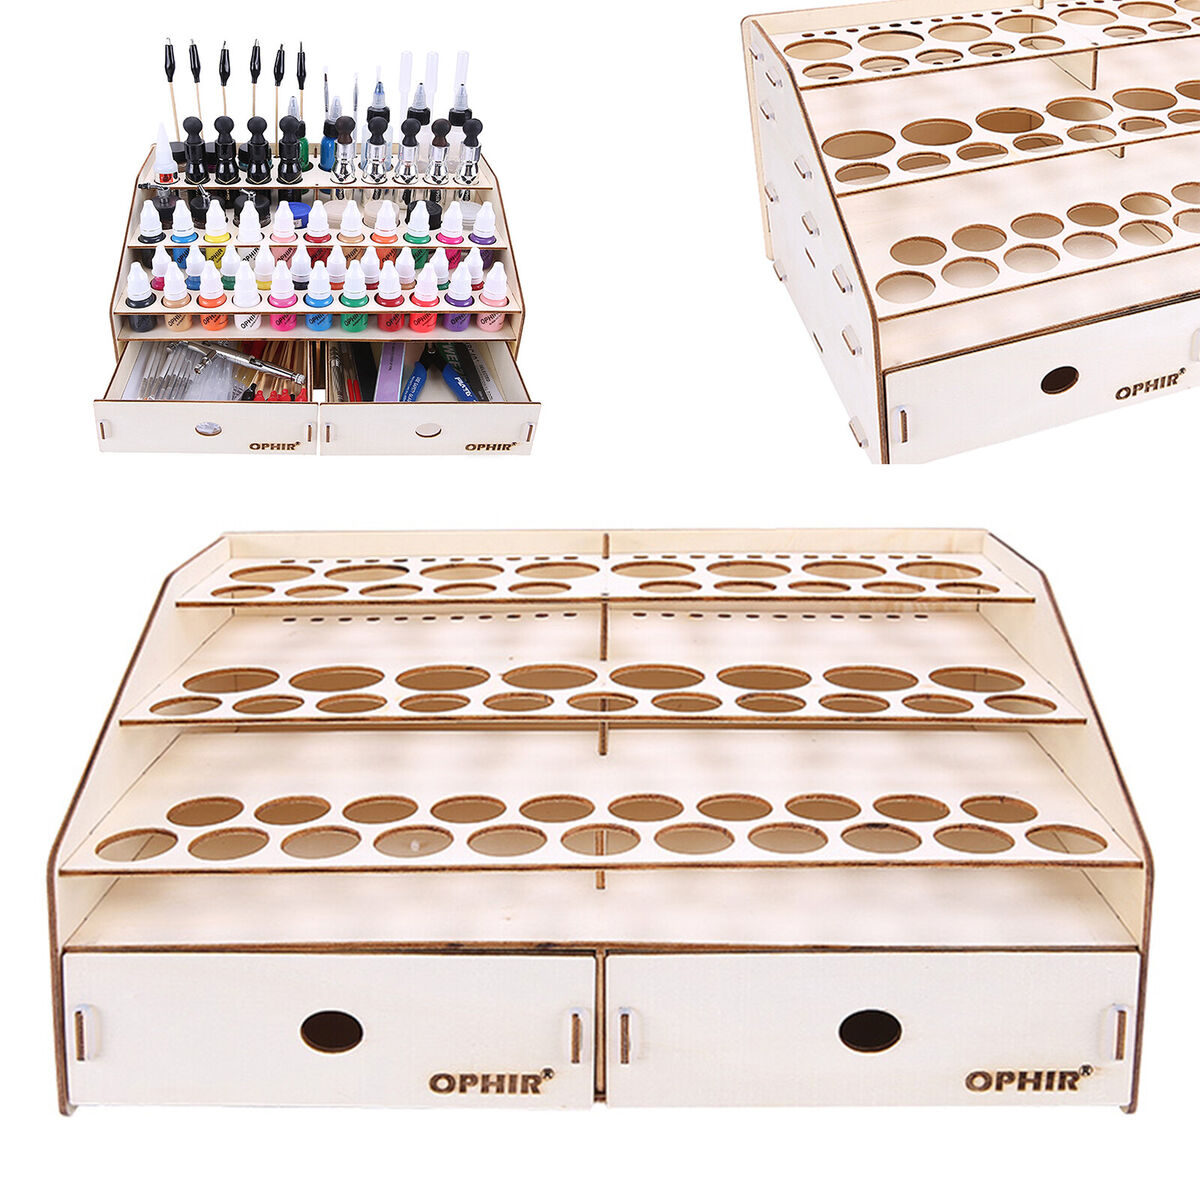 80 HOLES BOTTLE PAINT RACK STORAGE WOODEN HOBBY ORGANIZER WITH